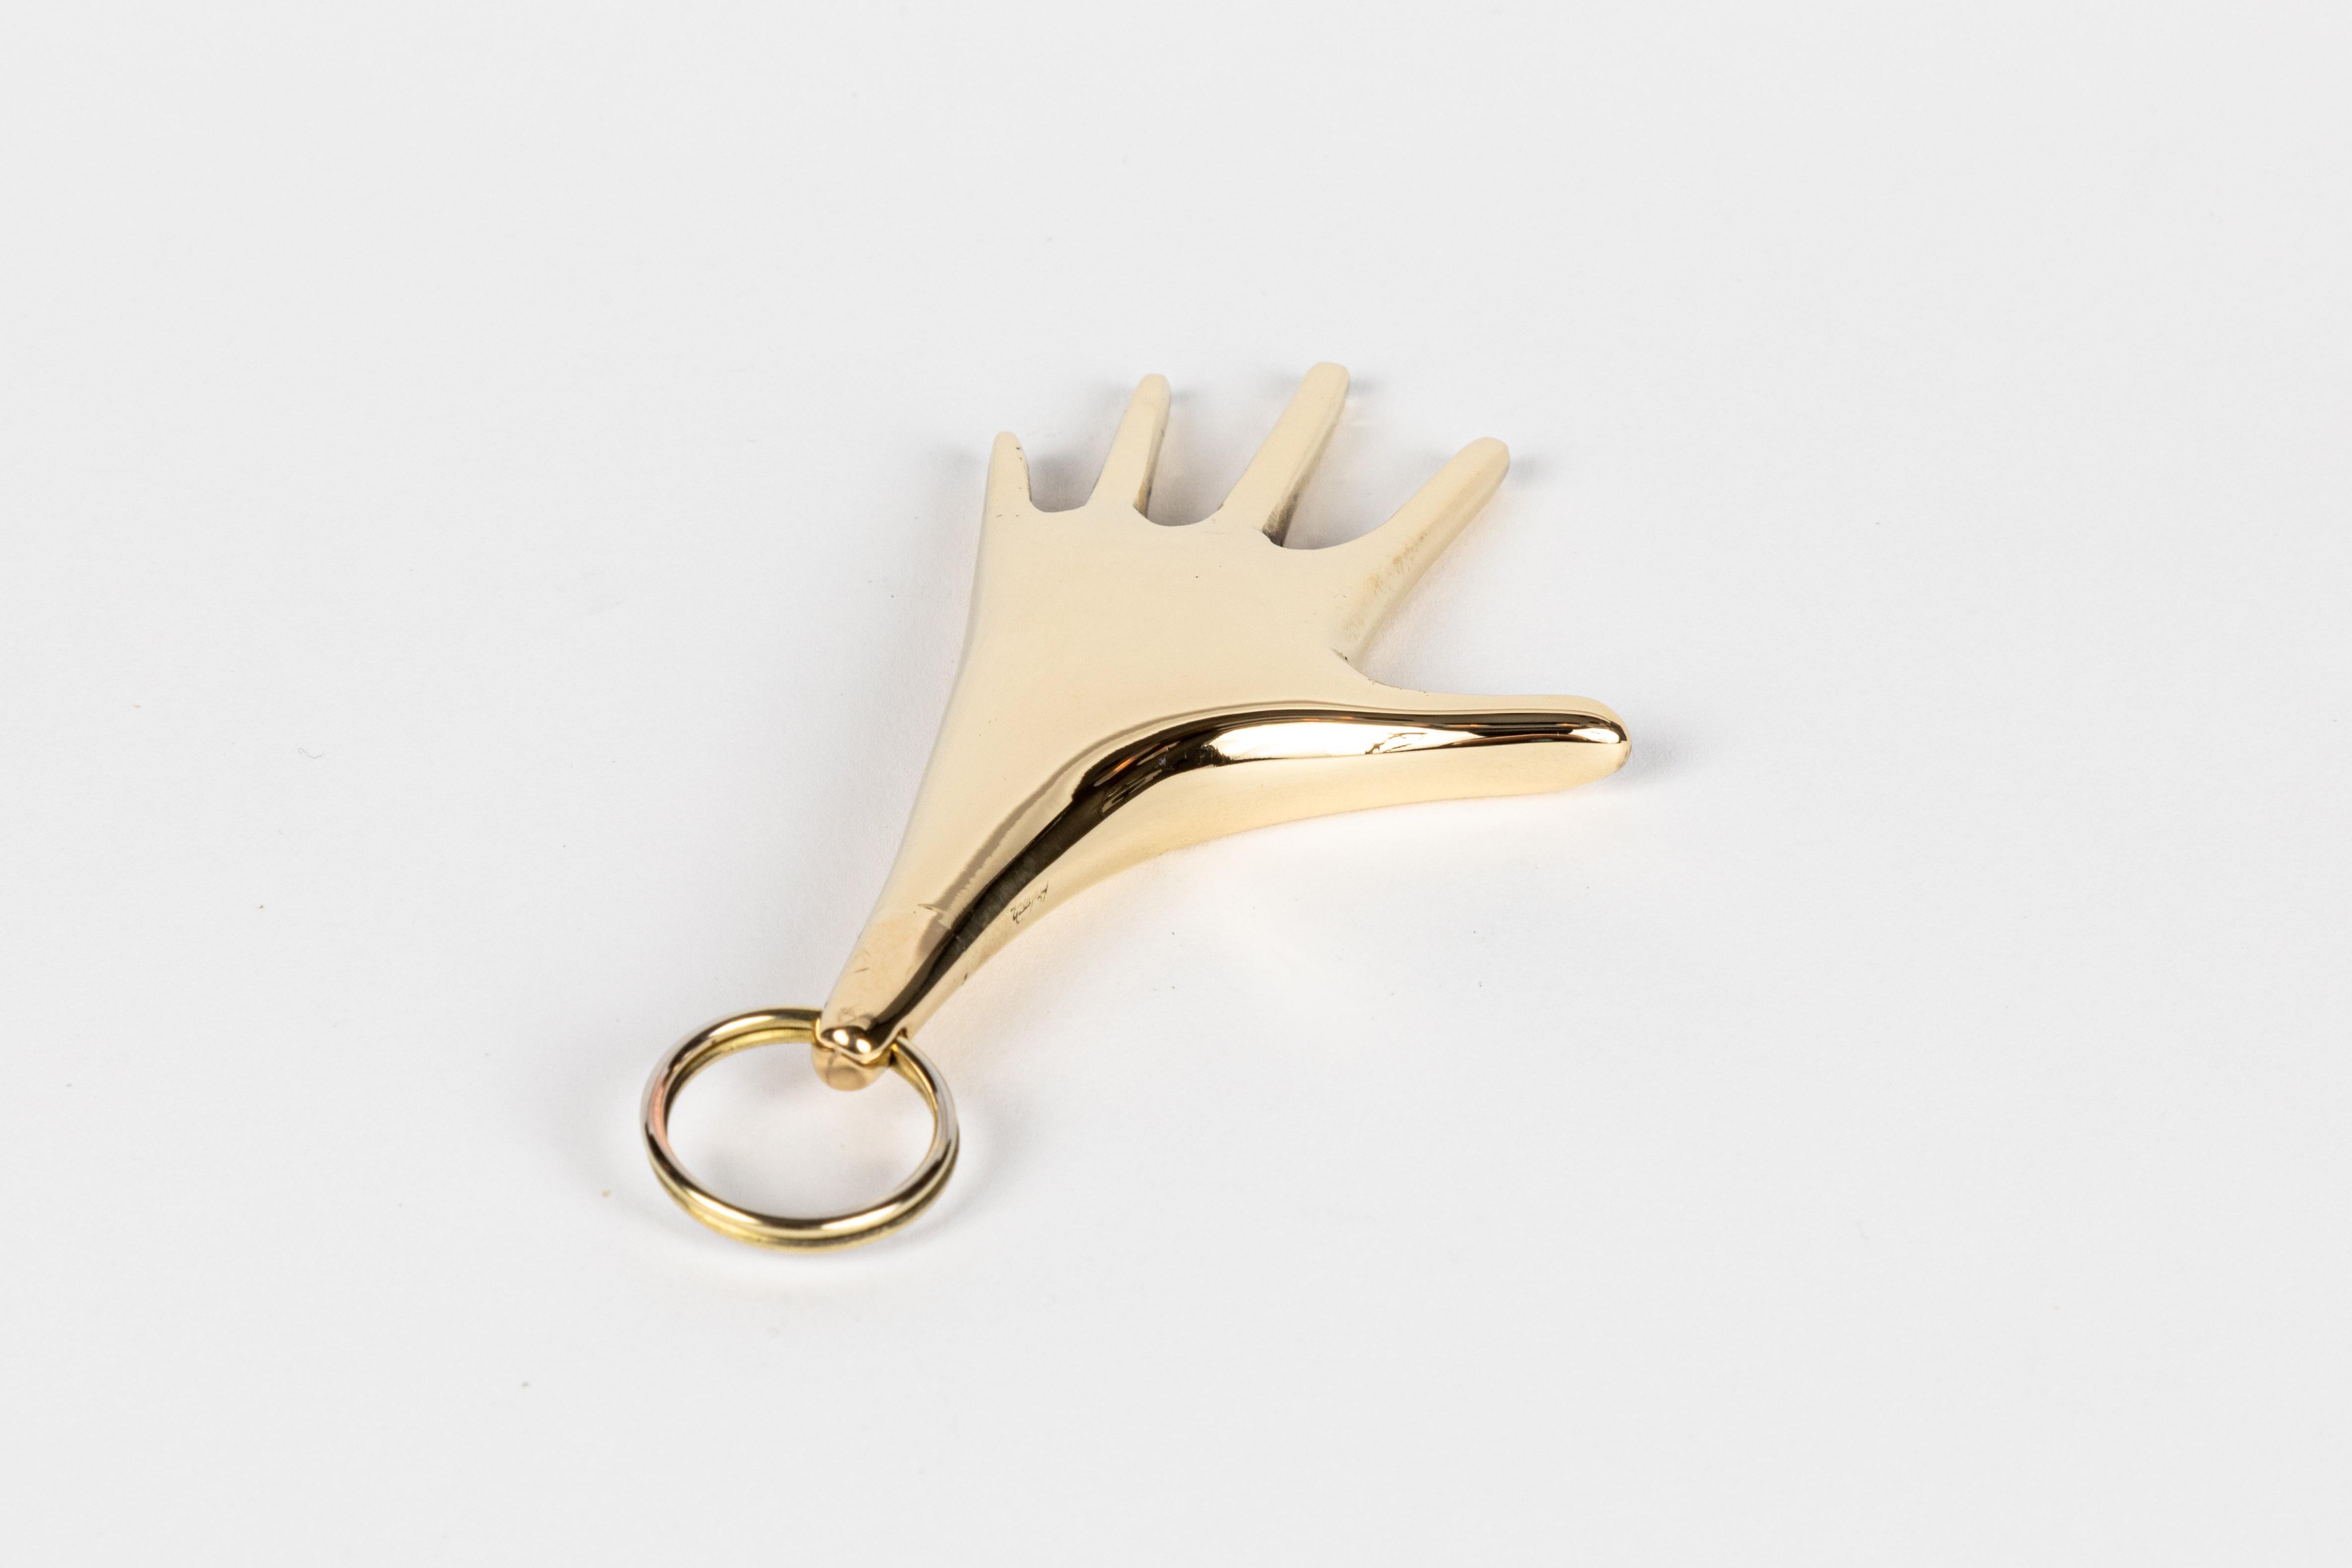 Carl Auböck model #5732 'Hand' brass figurine keyring. Designed in the 1950s, this incredibly refined and sculptural object is hand fabricated in polished brass. 

Price is per item. On in stock ready to ship. Available in unlimited quantities.